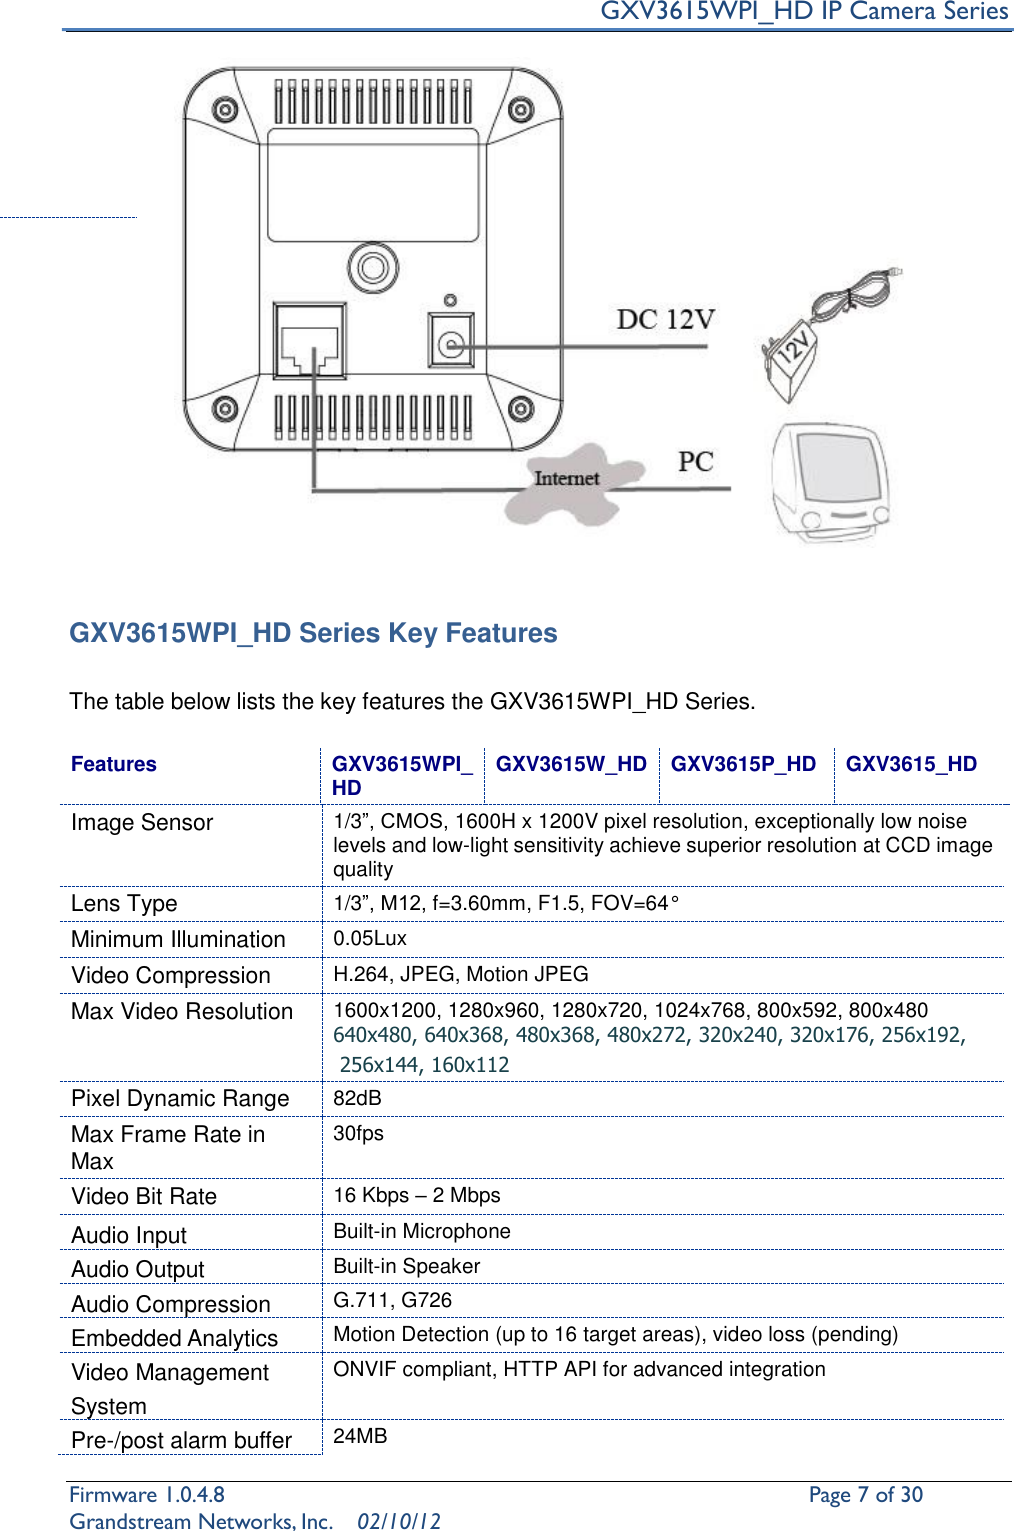     GXV3615WPI_HD IP Camera Series Firmware 1.0.4.8                                                   Page 7 of 30     Grandstream Networks, Inc.  02/10/12     GXV3615WPI_HD Series Key Features    The table below lists the key features the GXV3615WPI_HD Series.  Features GXV3615WPI_HD GXV3615W_HD GXV3615P_HD GXV3615_HD Image Sensor 1/3”, CMOS, 1600H x 1200V pixel resolution, exceptionally low noise levels and low-light sensitivity achieve superior resolution at CCD image quality   Lens Type 1/3”, M12, f=3.60mm, F1.5, FOV=64° Minimum Illumination 0.05Lux Video Compression H.264, JPEG, Motion JPEG Max Video Resolution 1600x1200, 1280x960, 1280x720, 1024x768, 800x592, 800x480 640x480, 640x368, 480x368, 480x272, 320x240, 320x176, 256x192,  256x144, 160x112 Pixel Dynamic Range 82dB Max Frame Rate in Max 30fps Video Bit Rate 16 Kbps – 2 Mbps Audio Input Built-in Microphone Audio Output Built-in Speaker Audio Compression G.711, G726 Embedded Analytics   Motion Detection (up to 16 target areas), video loss (pending)   Video Management System ONVIF compliant, HTTP API for advanced integration Pre-/post alarm buffer   24MB   